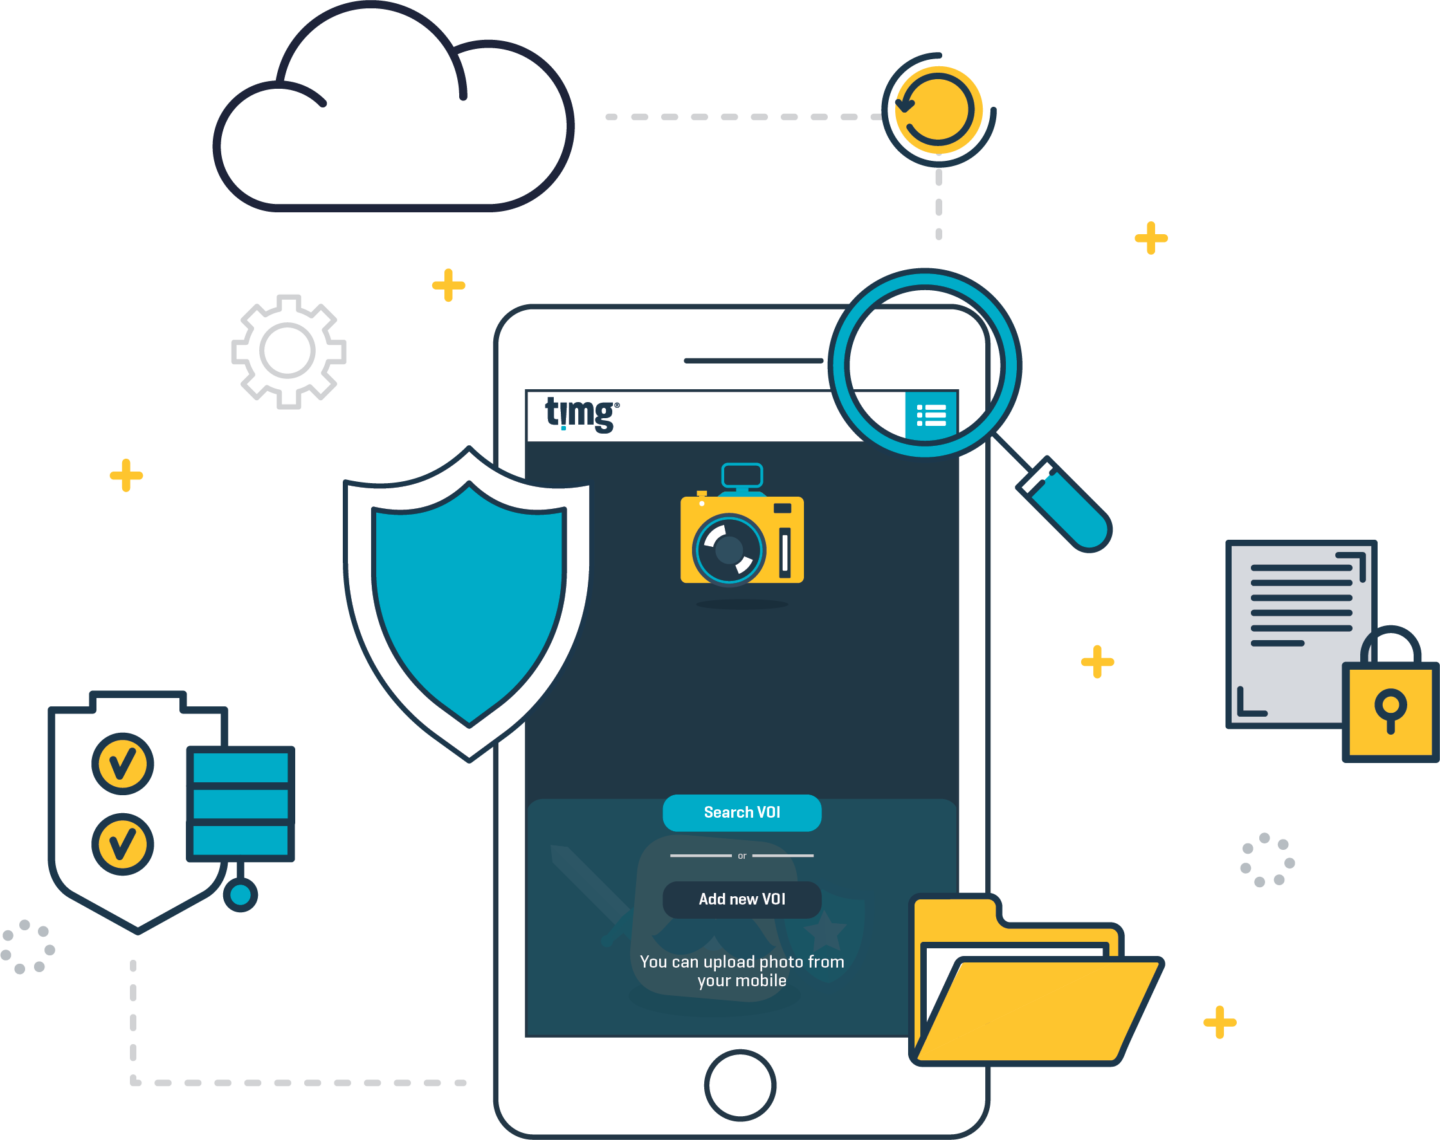 Our VOI app makes it easy to collect and archive your clients’ private information, such as identity documents and contracts. And in one simple step, you can transfer data direct to TIMG Vault Report, so you won’t need to keep it on your mobile device.